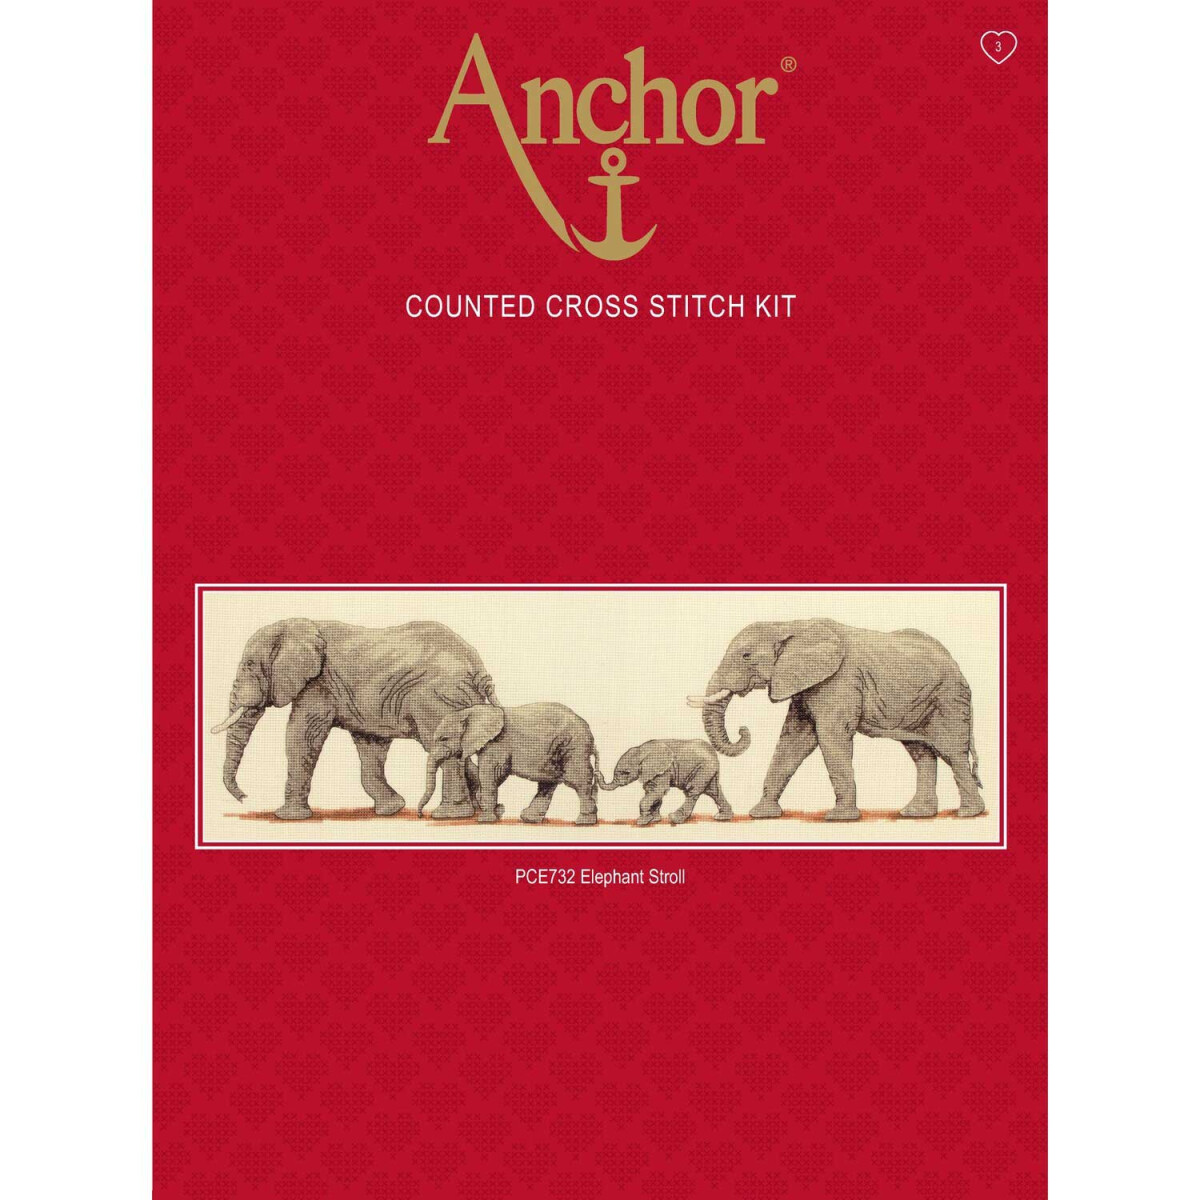 Anchor counted Cross Stitch kit "Elephant...